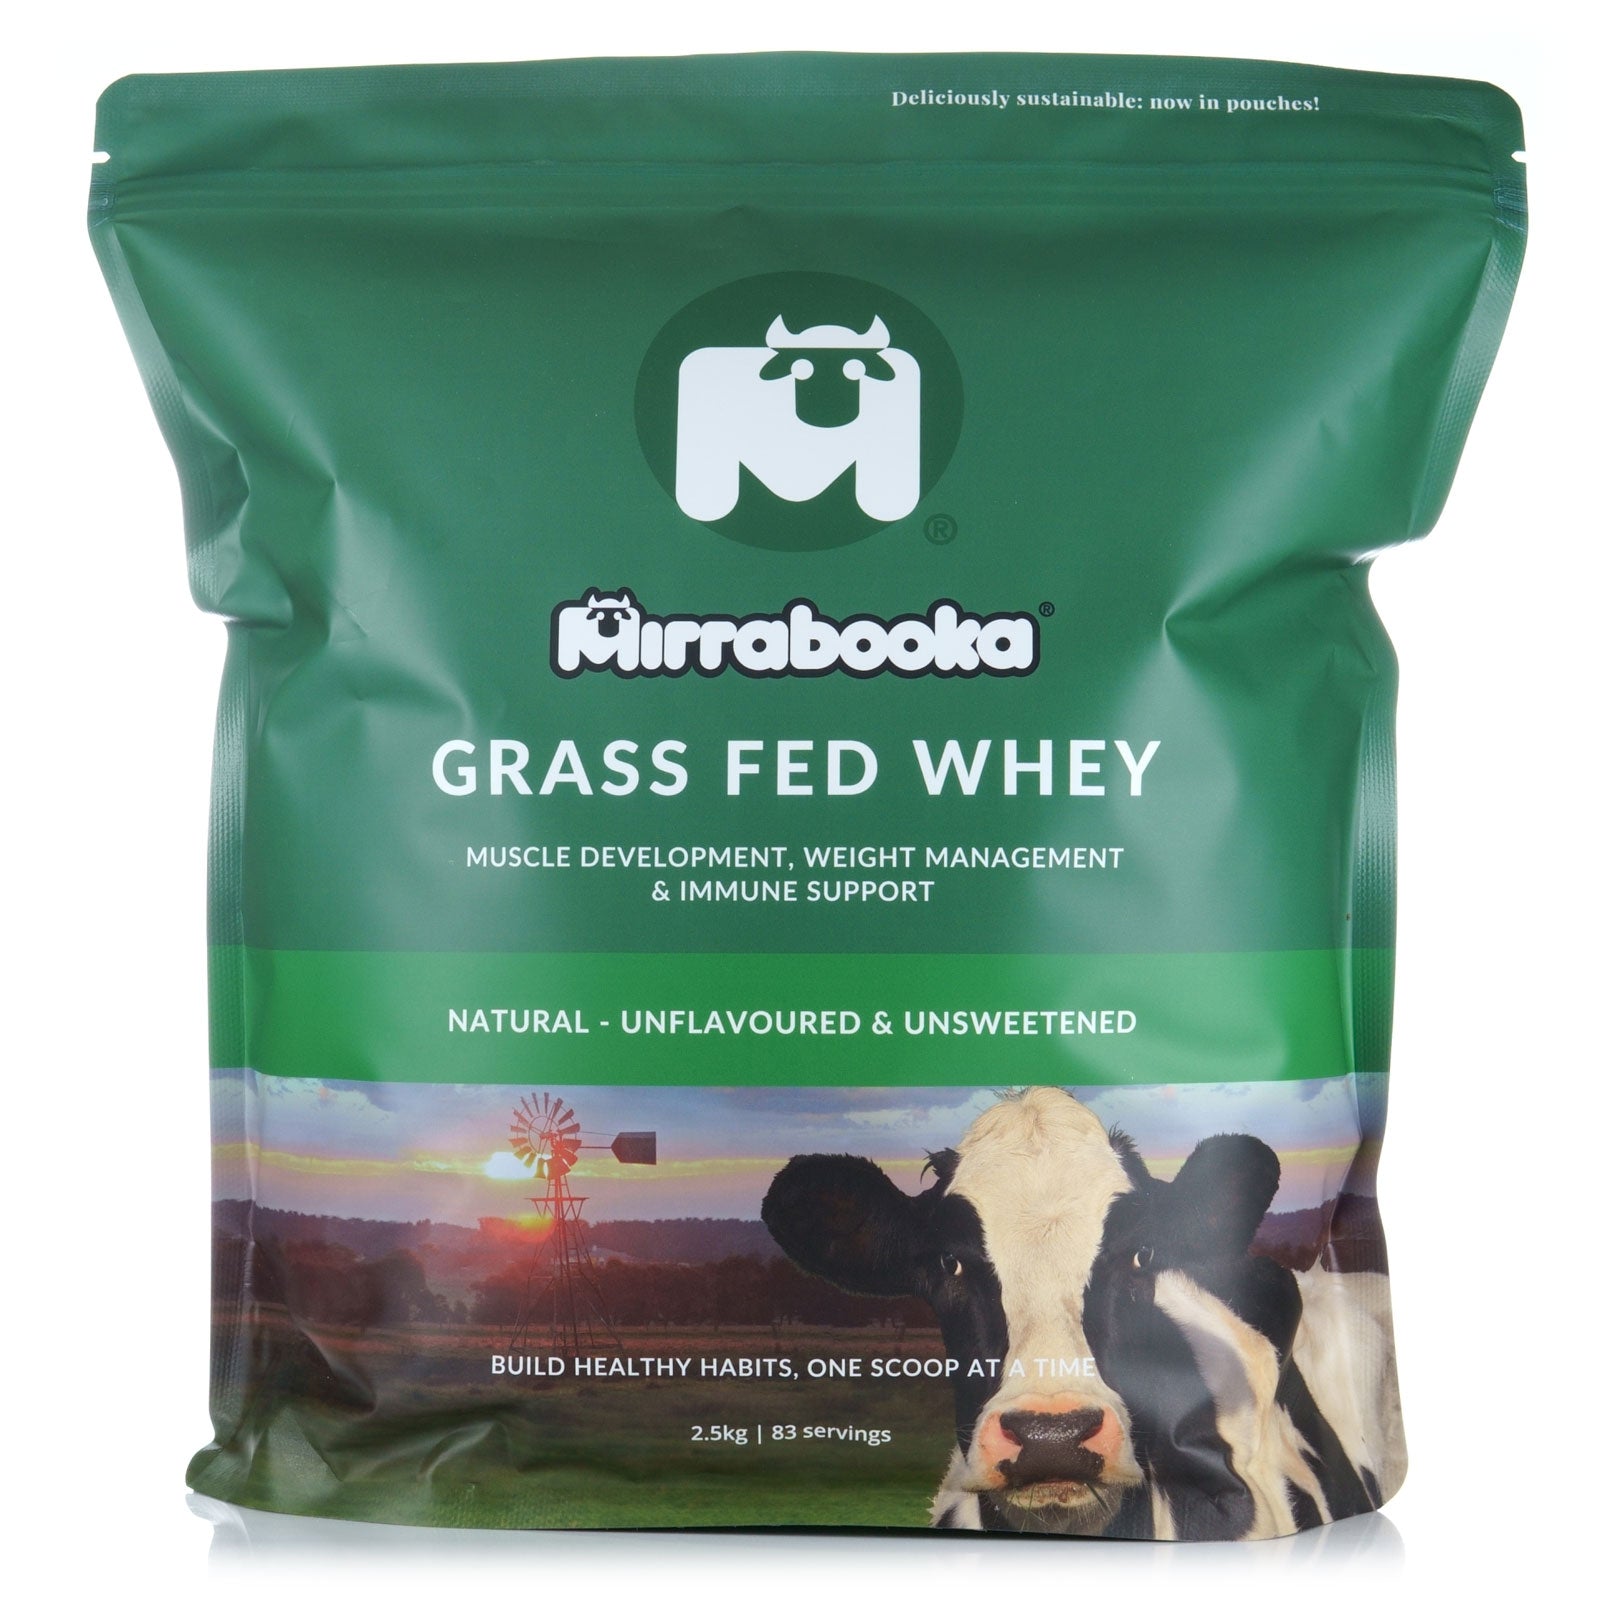 Grass Fed Whey Protein Unflavoured Natural 2.5kg (83 servings)